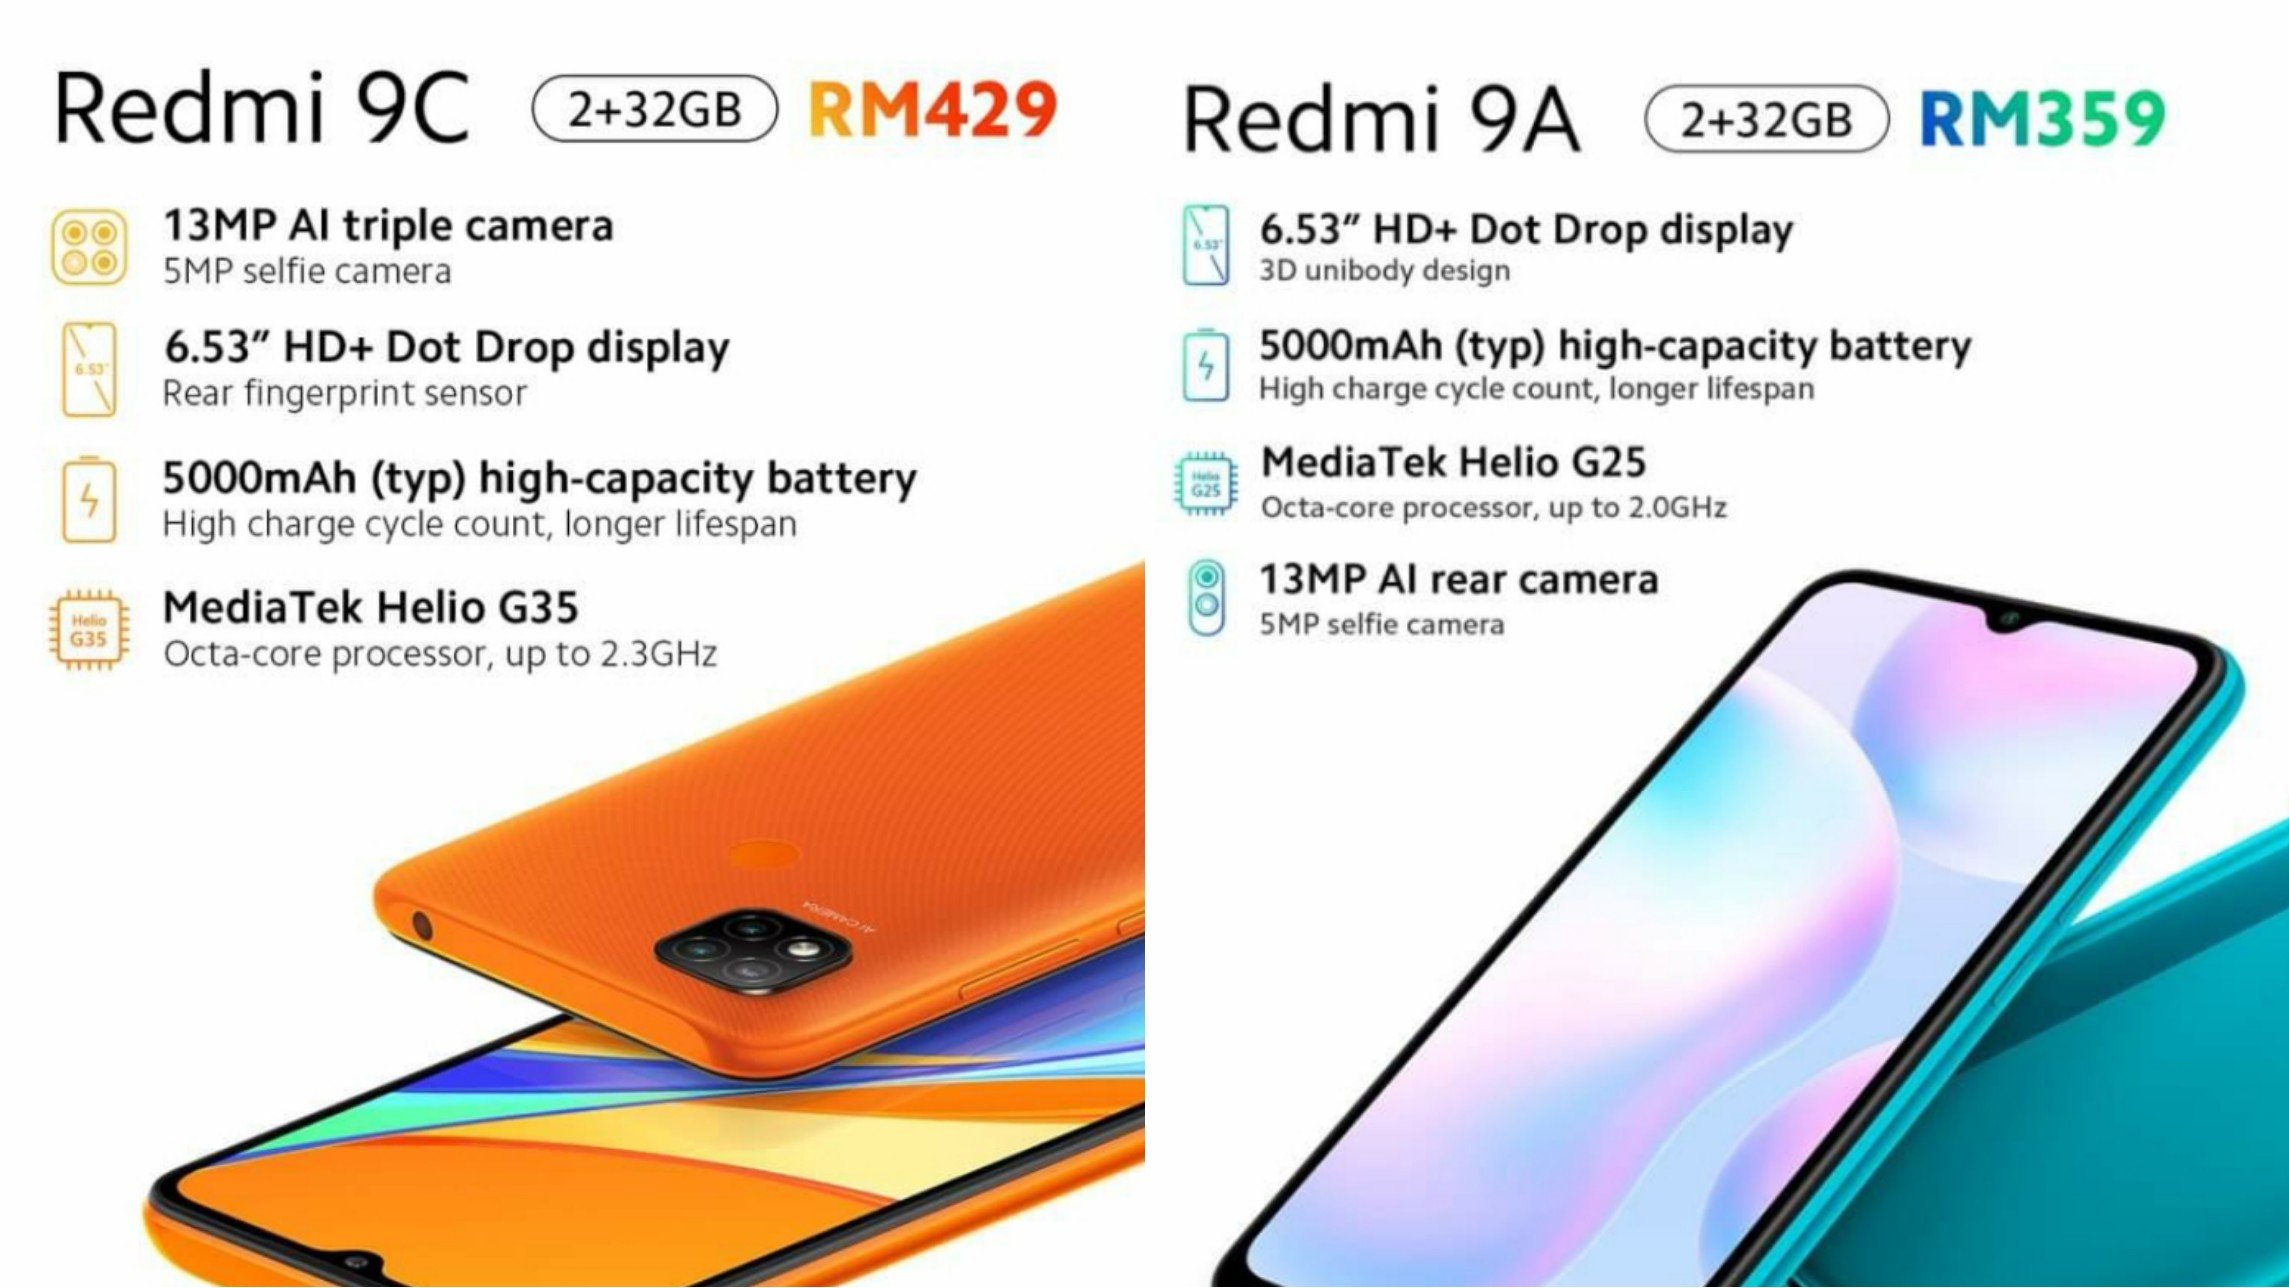 Xiaomi Redmi 9A and Redmi 9C launched Specification, price, and availability.